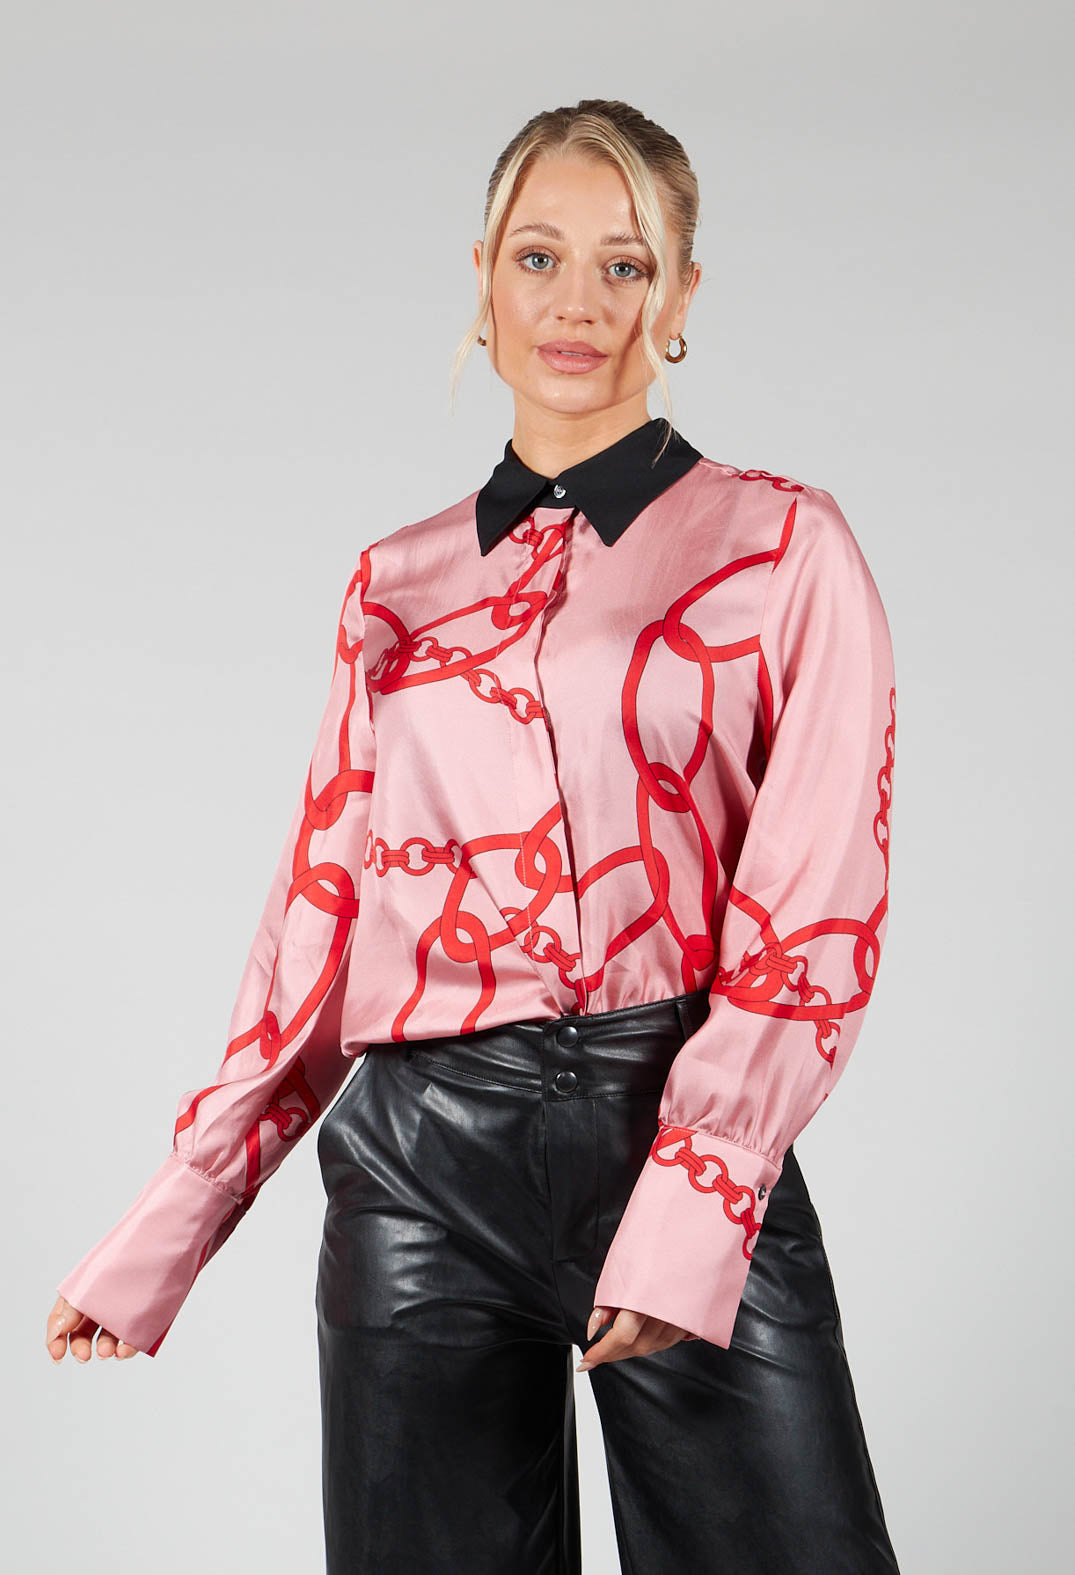 Chain Print Shirt in Pink